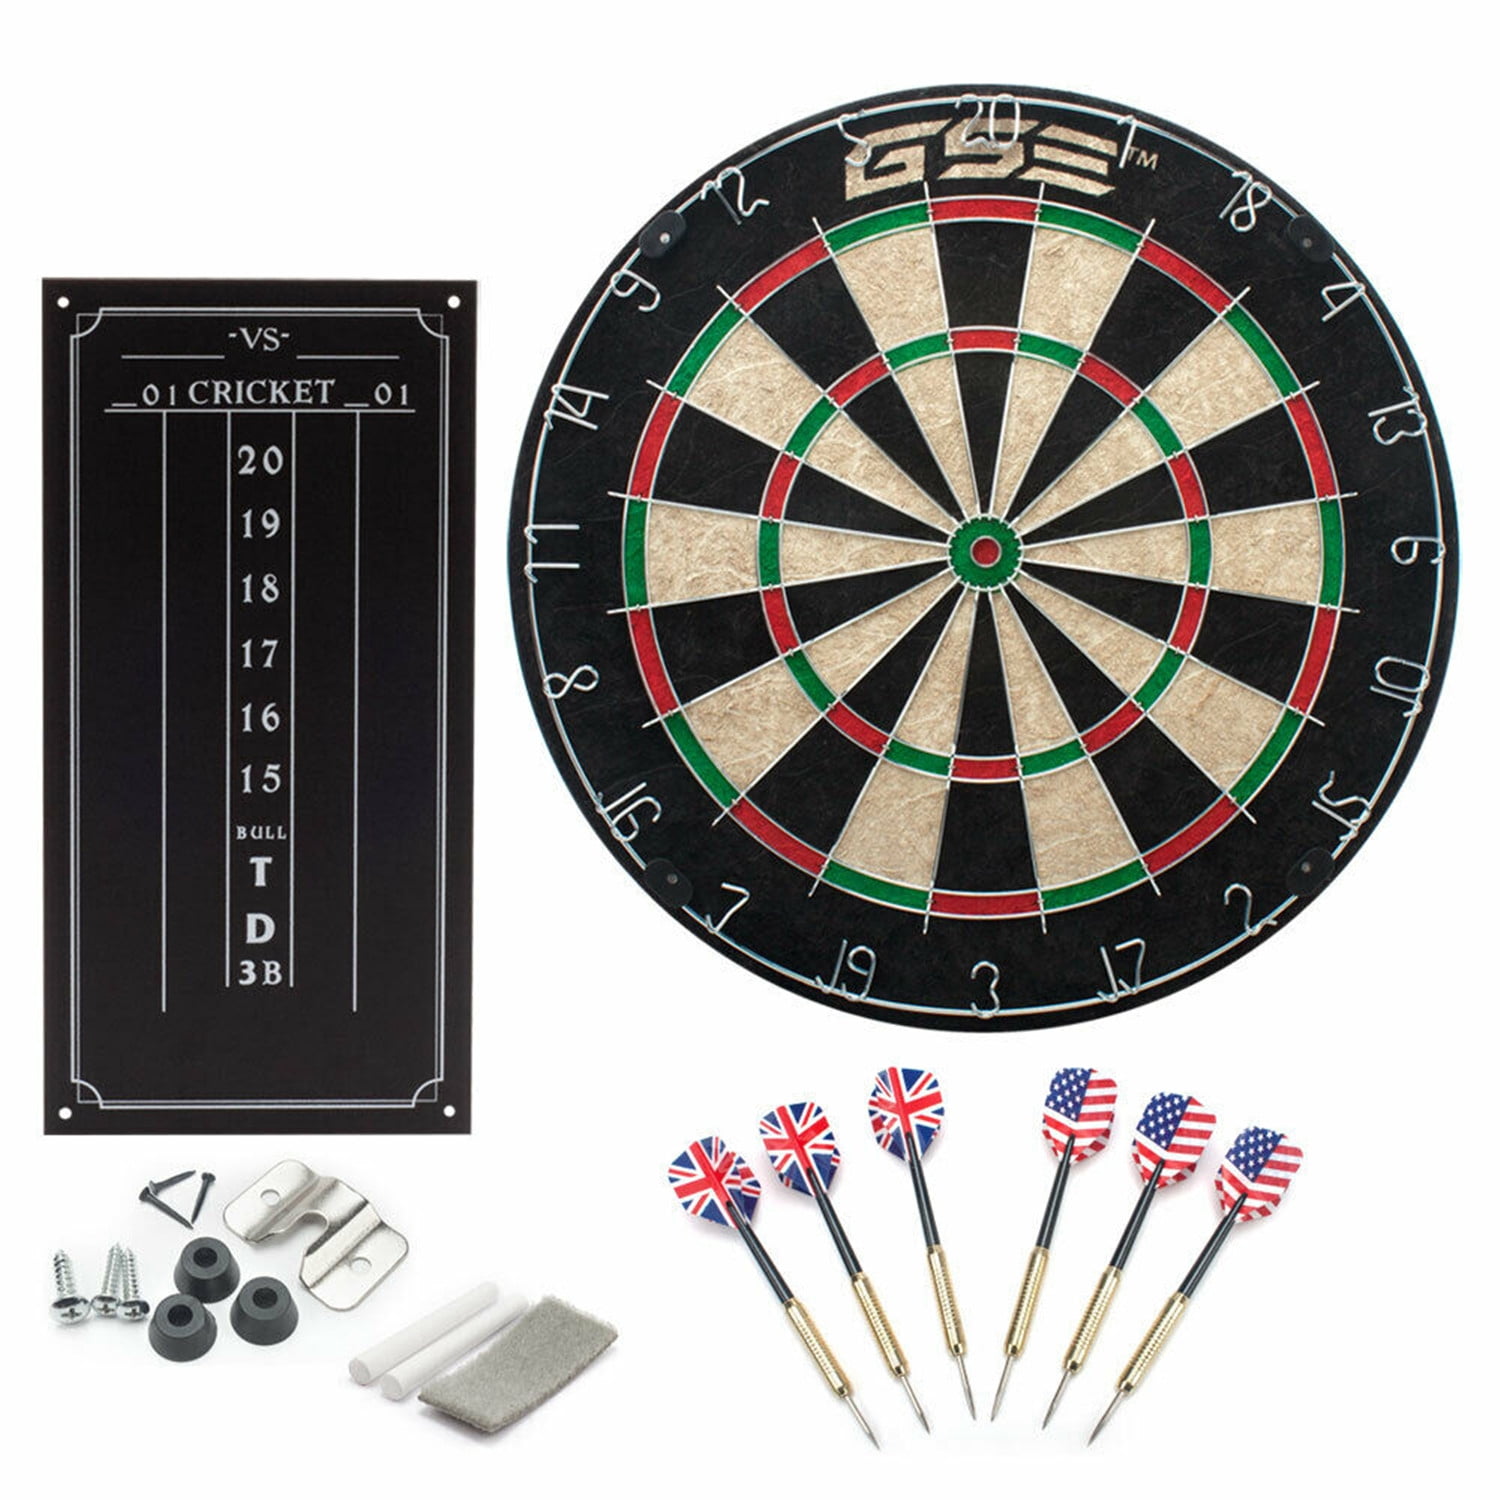 Dart board light kit tournaments or practice,B Traditional ideal league’s 